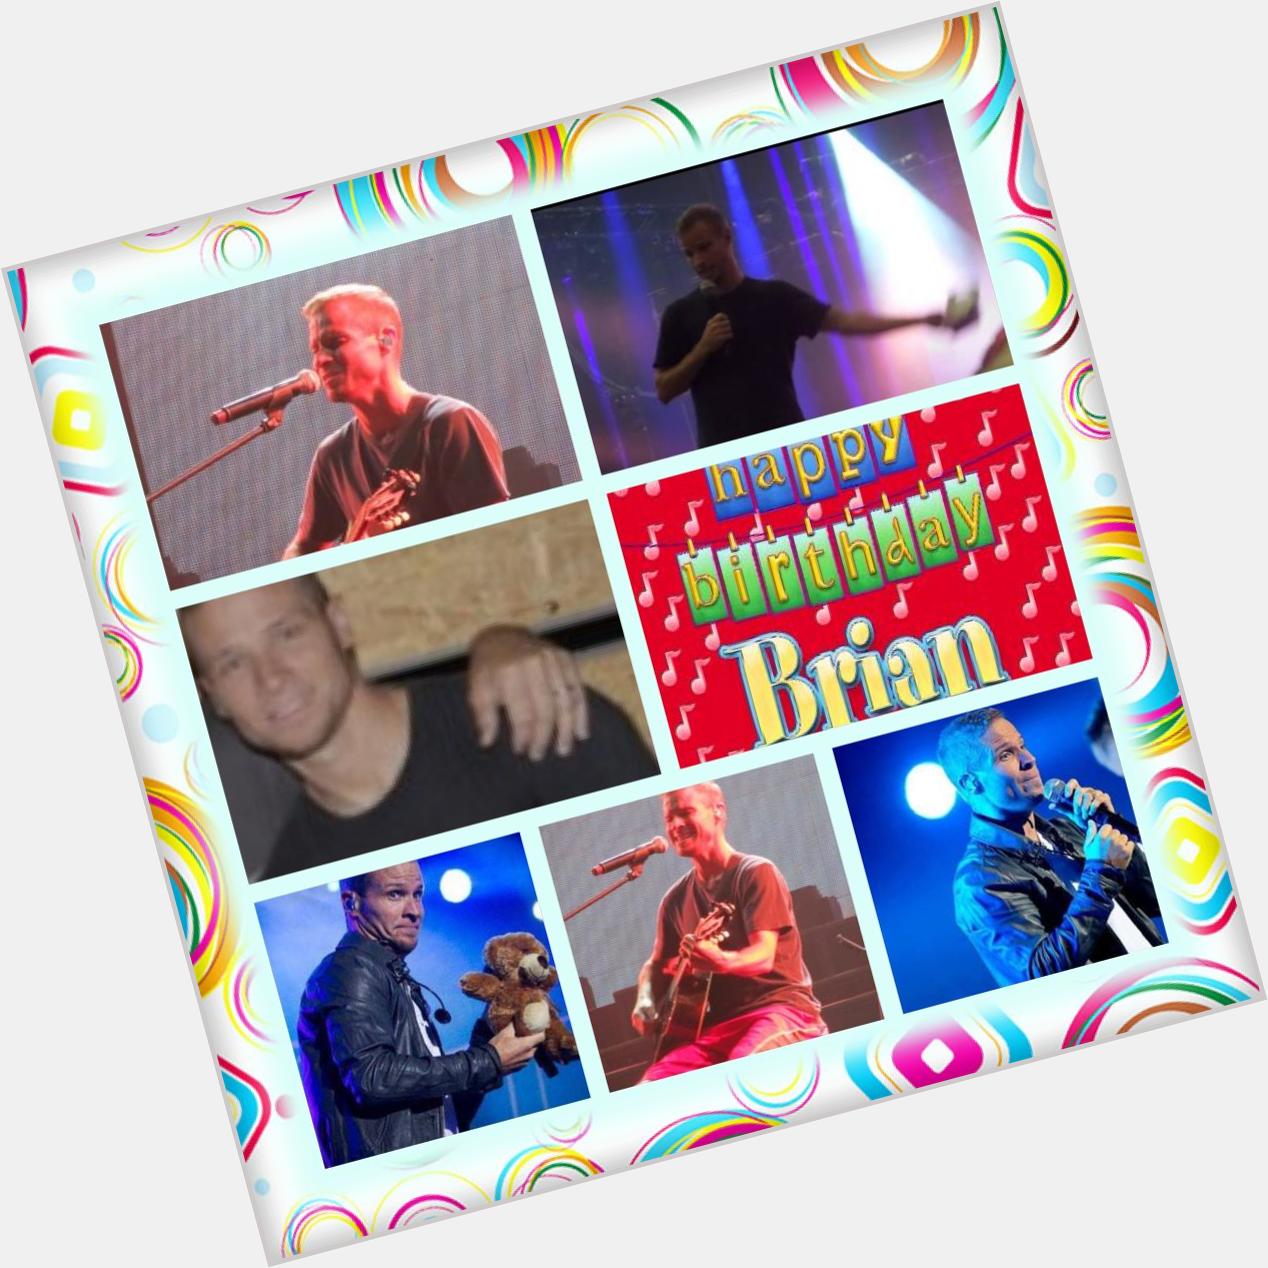    Happy Birthday Brian wish you all the best                